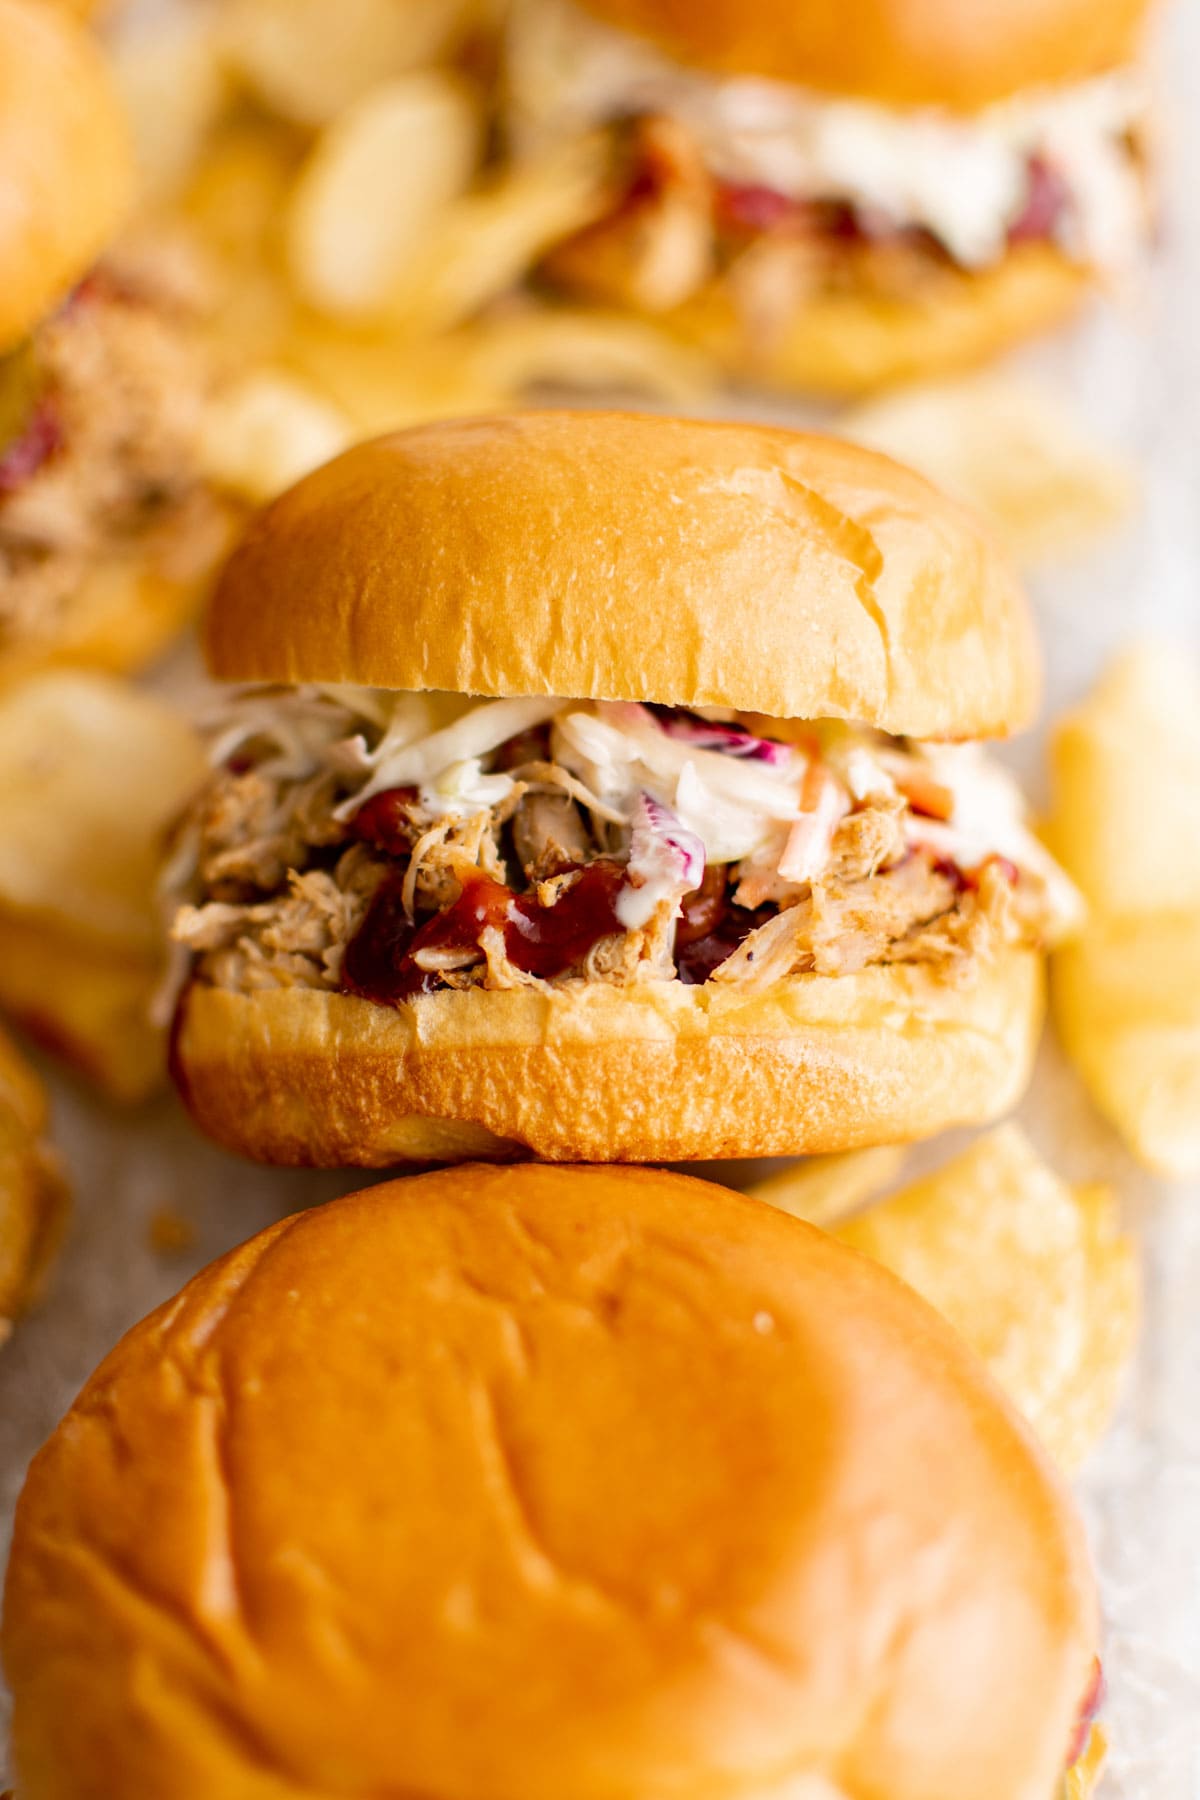 Pulled pork sandwiches with coleslaw and chips. 